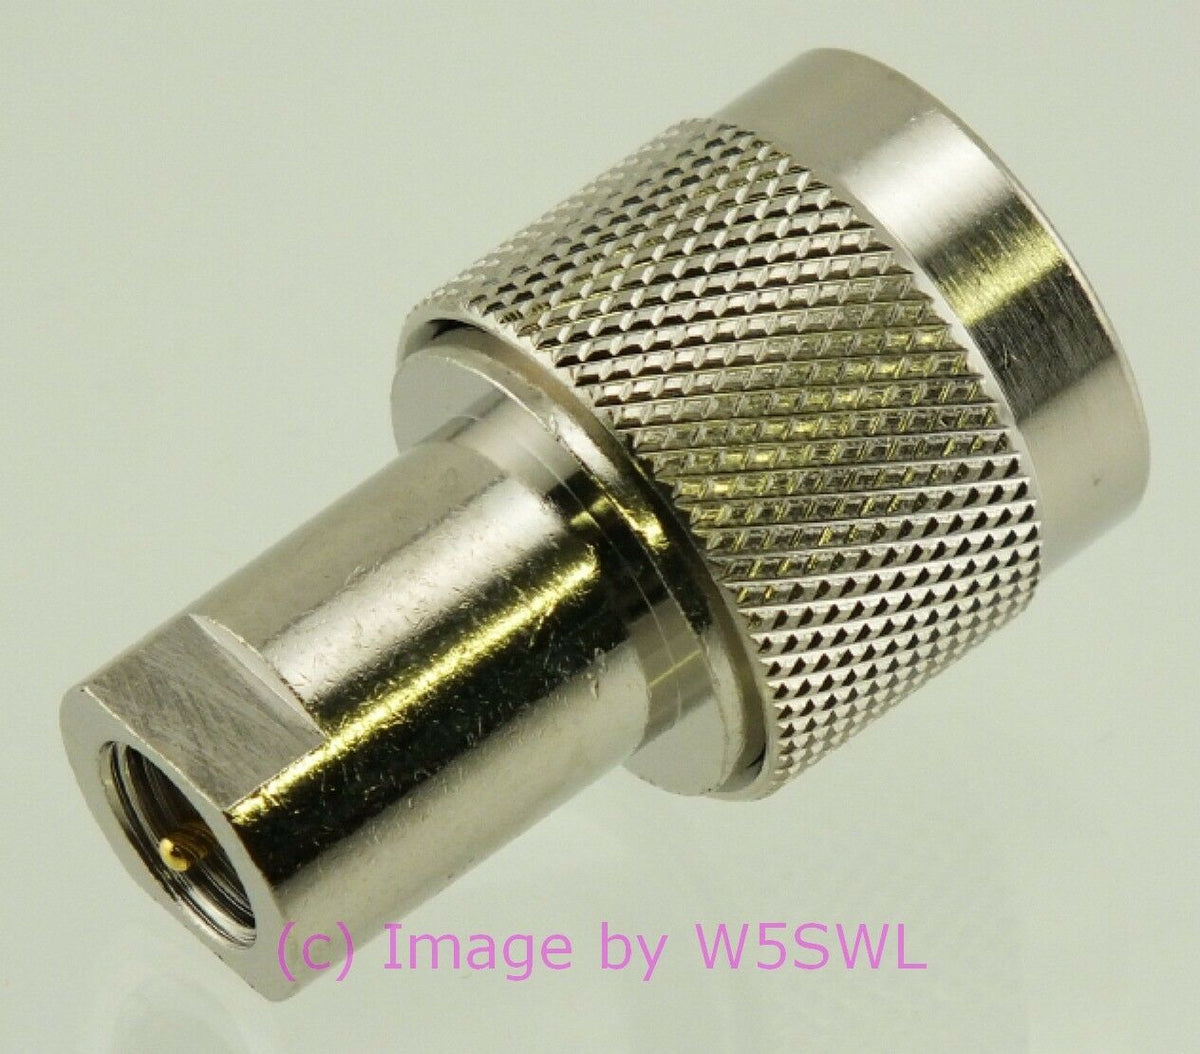 W5SWL Brand N Male to FME Male Coax Connector Adapter - Dave's Hobby Shop by W5SWL